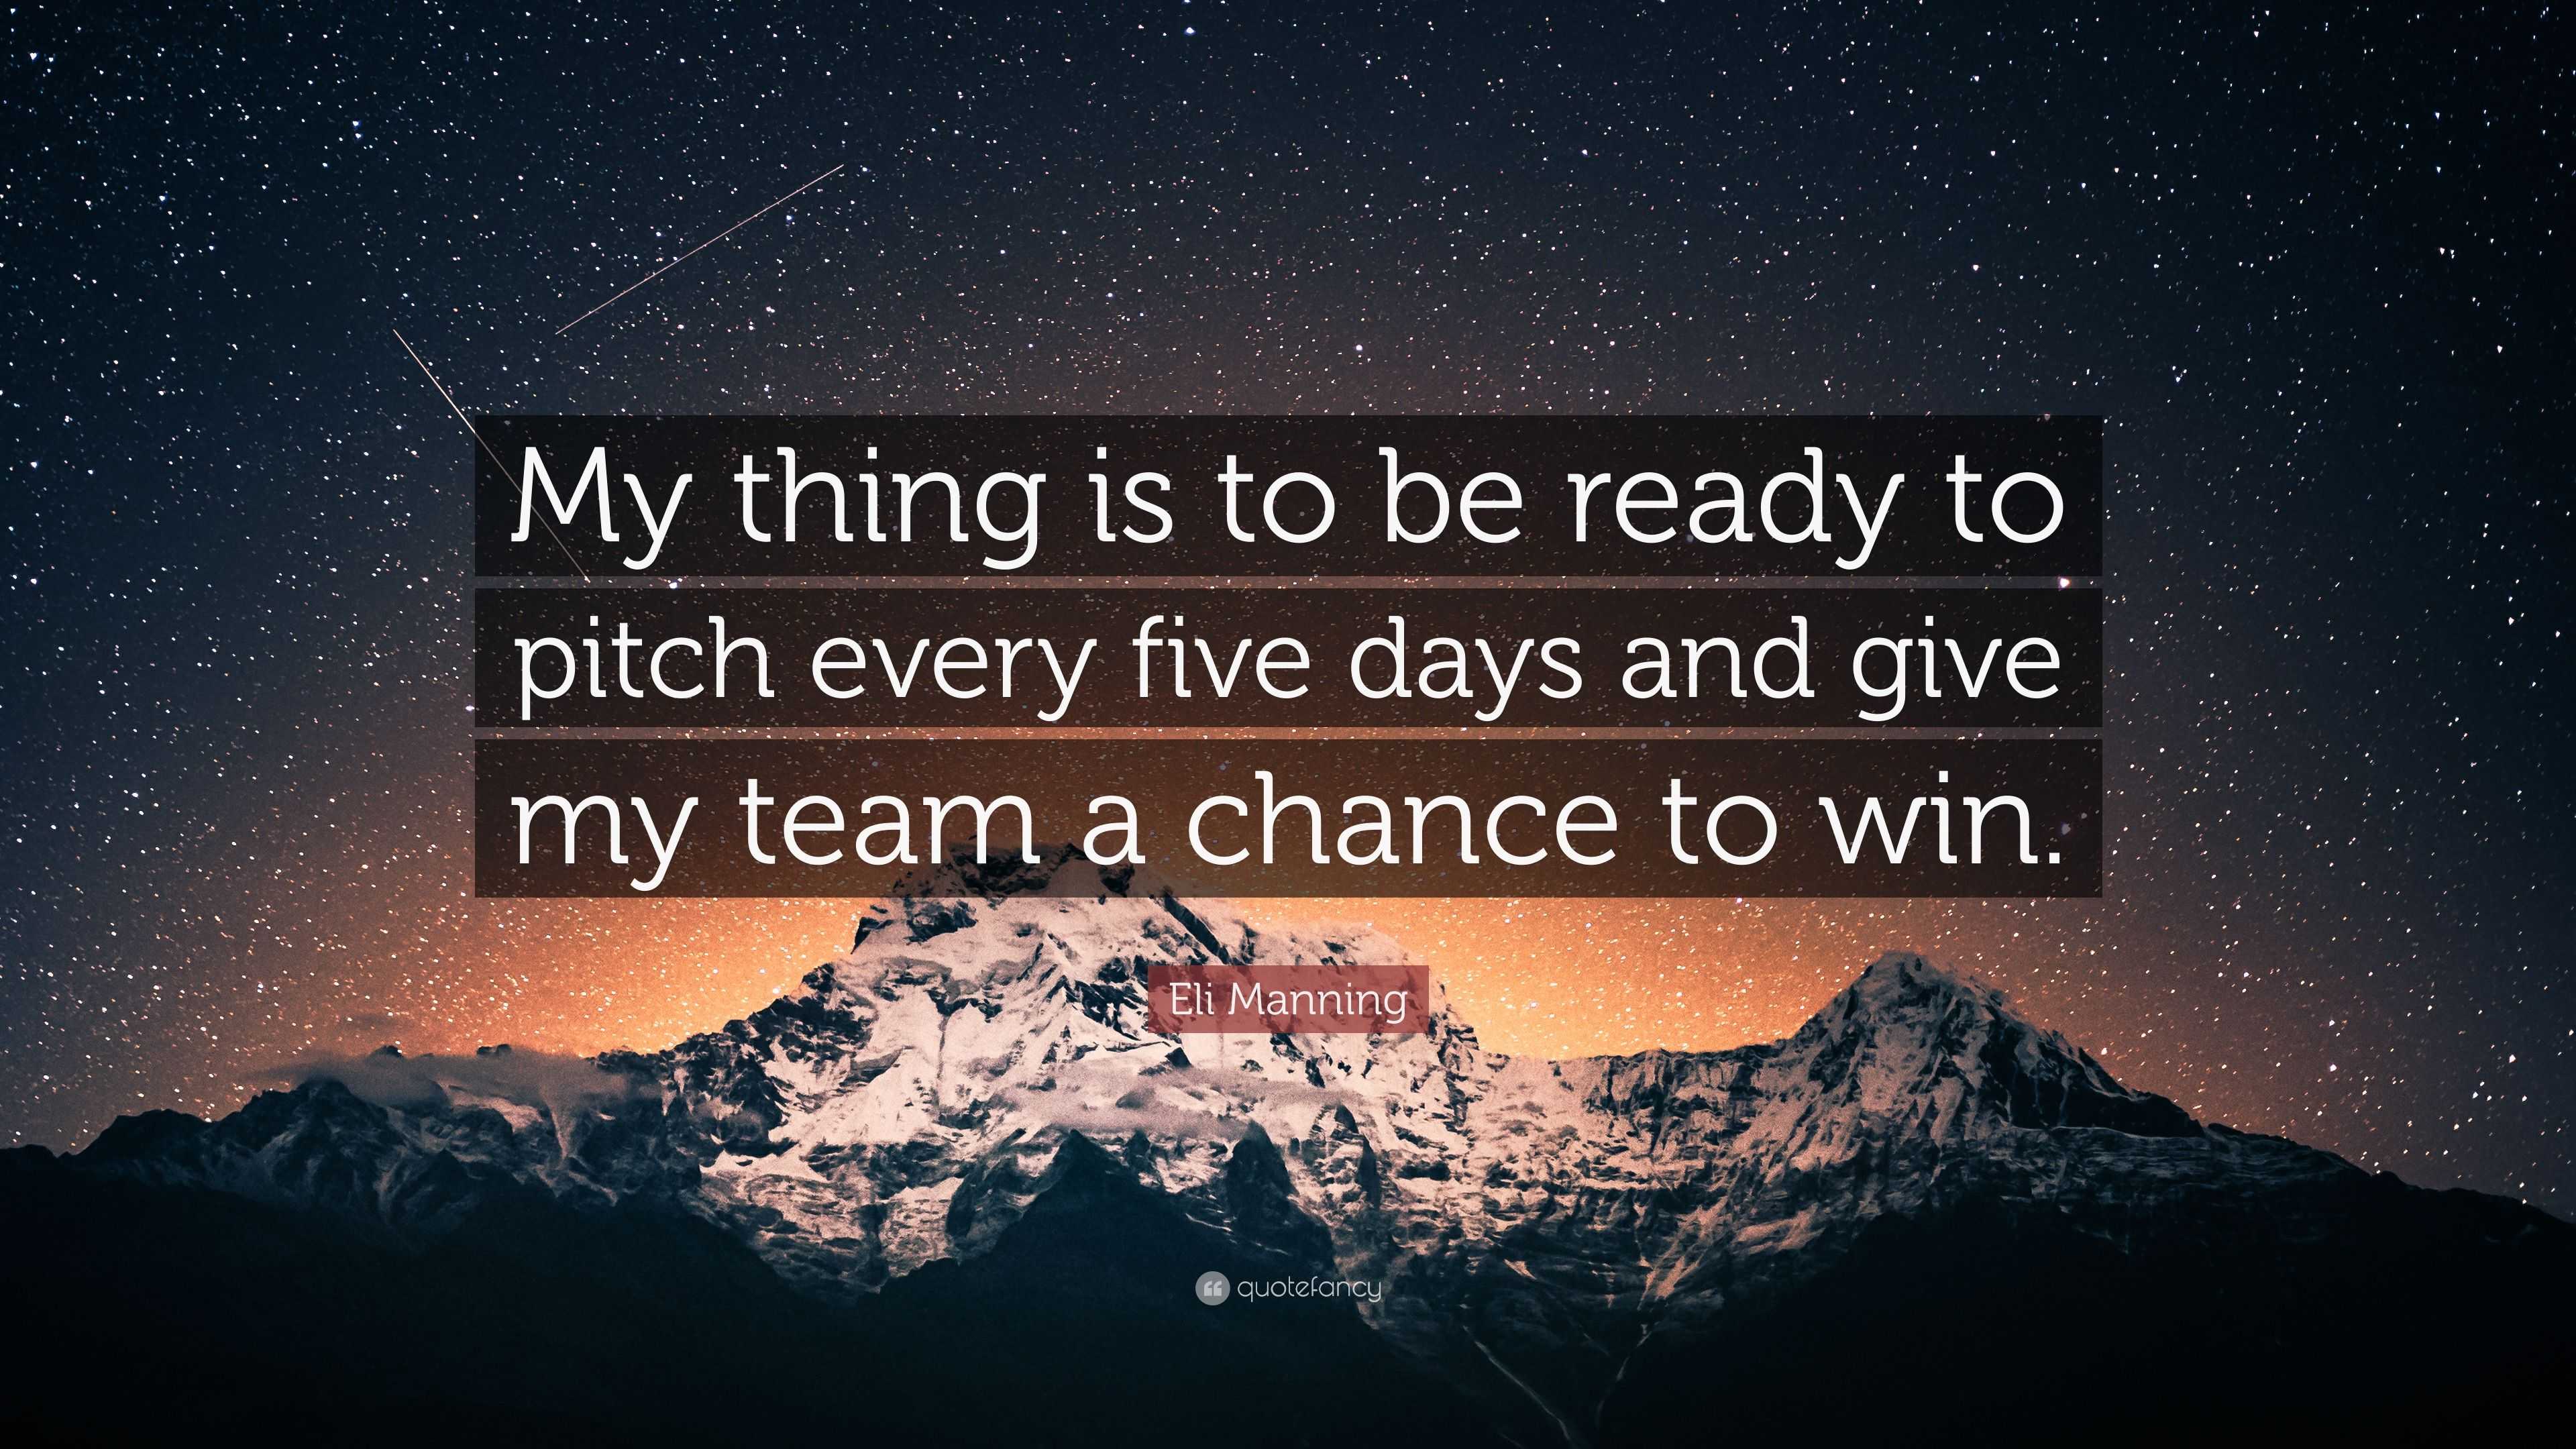 Eli Manning Quote: “My thing is to be ready to pitch every five days ...